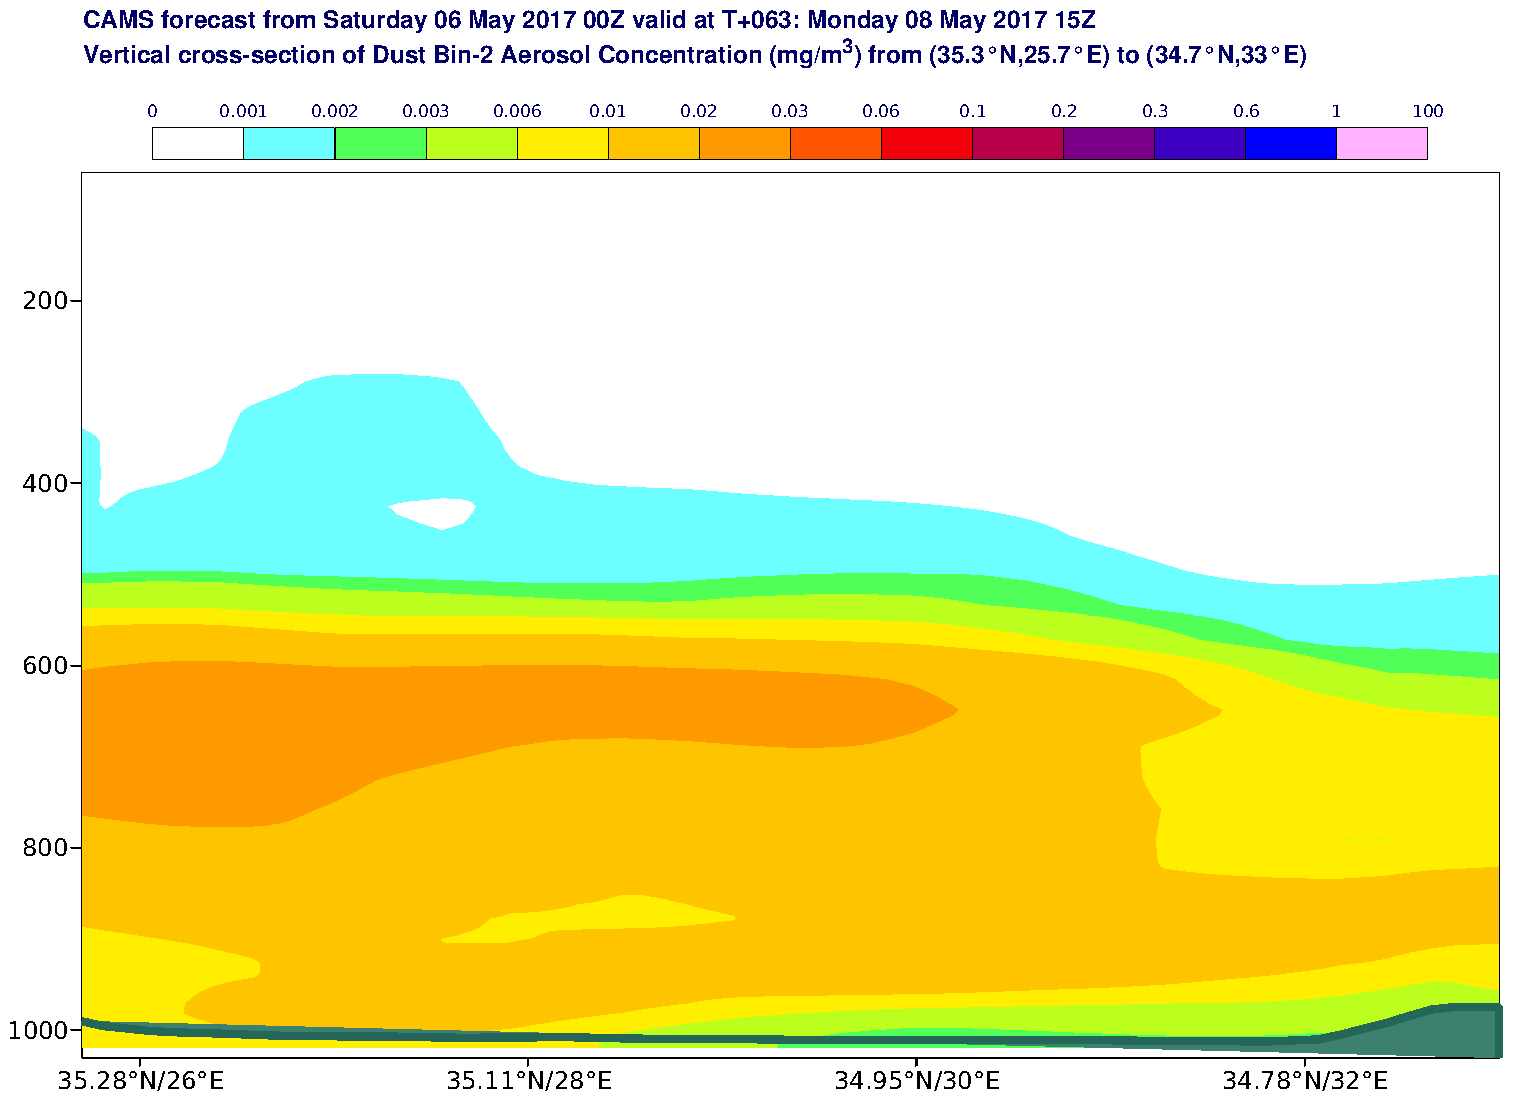 Vertical cross-section of Dust Bin-2 Aerosol Concentration (mg/m3) valid at T63 - 2017-05-08 15:00